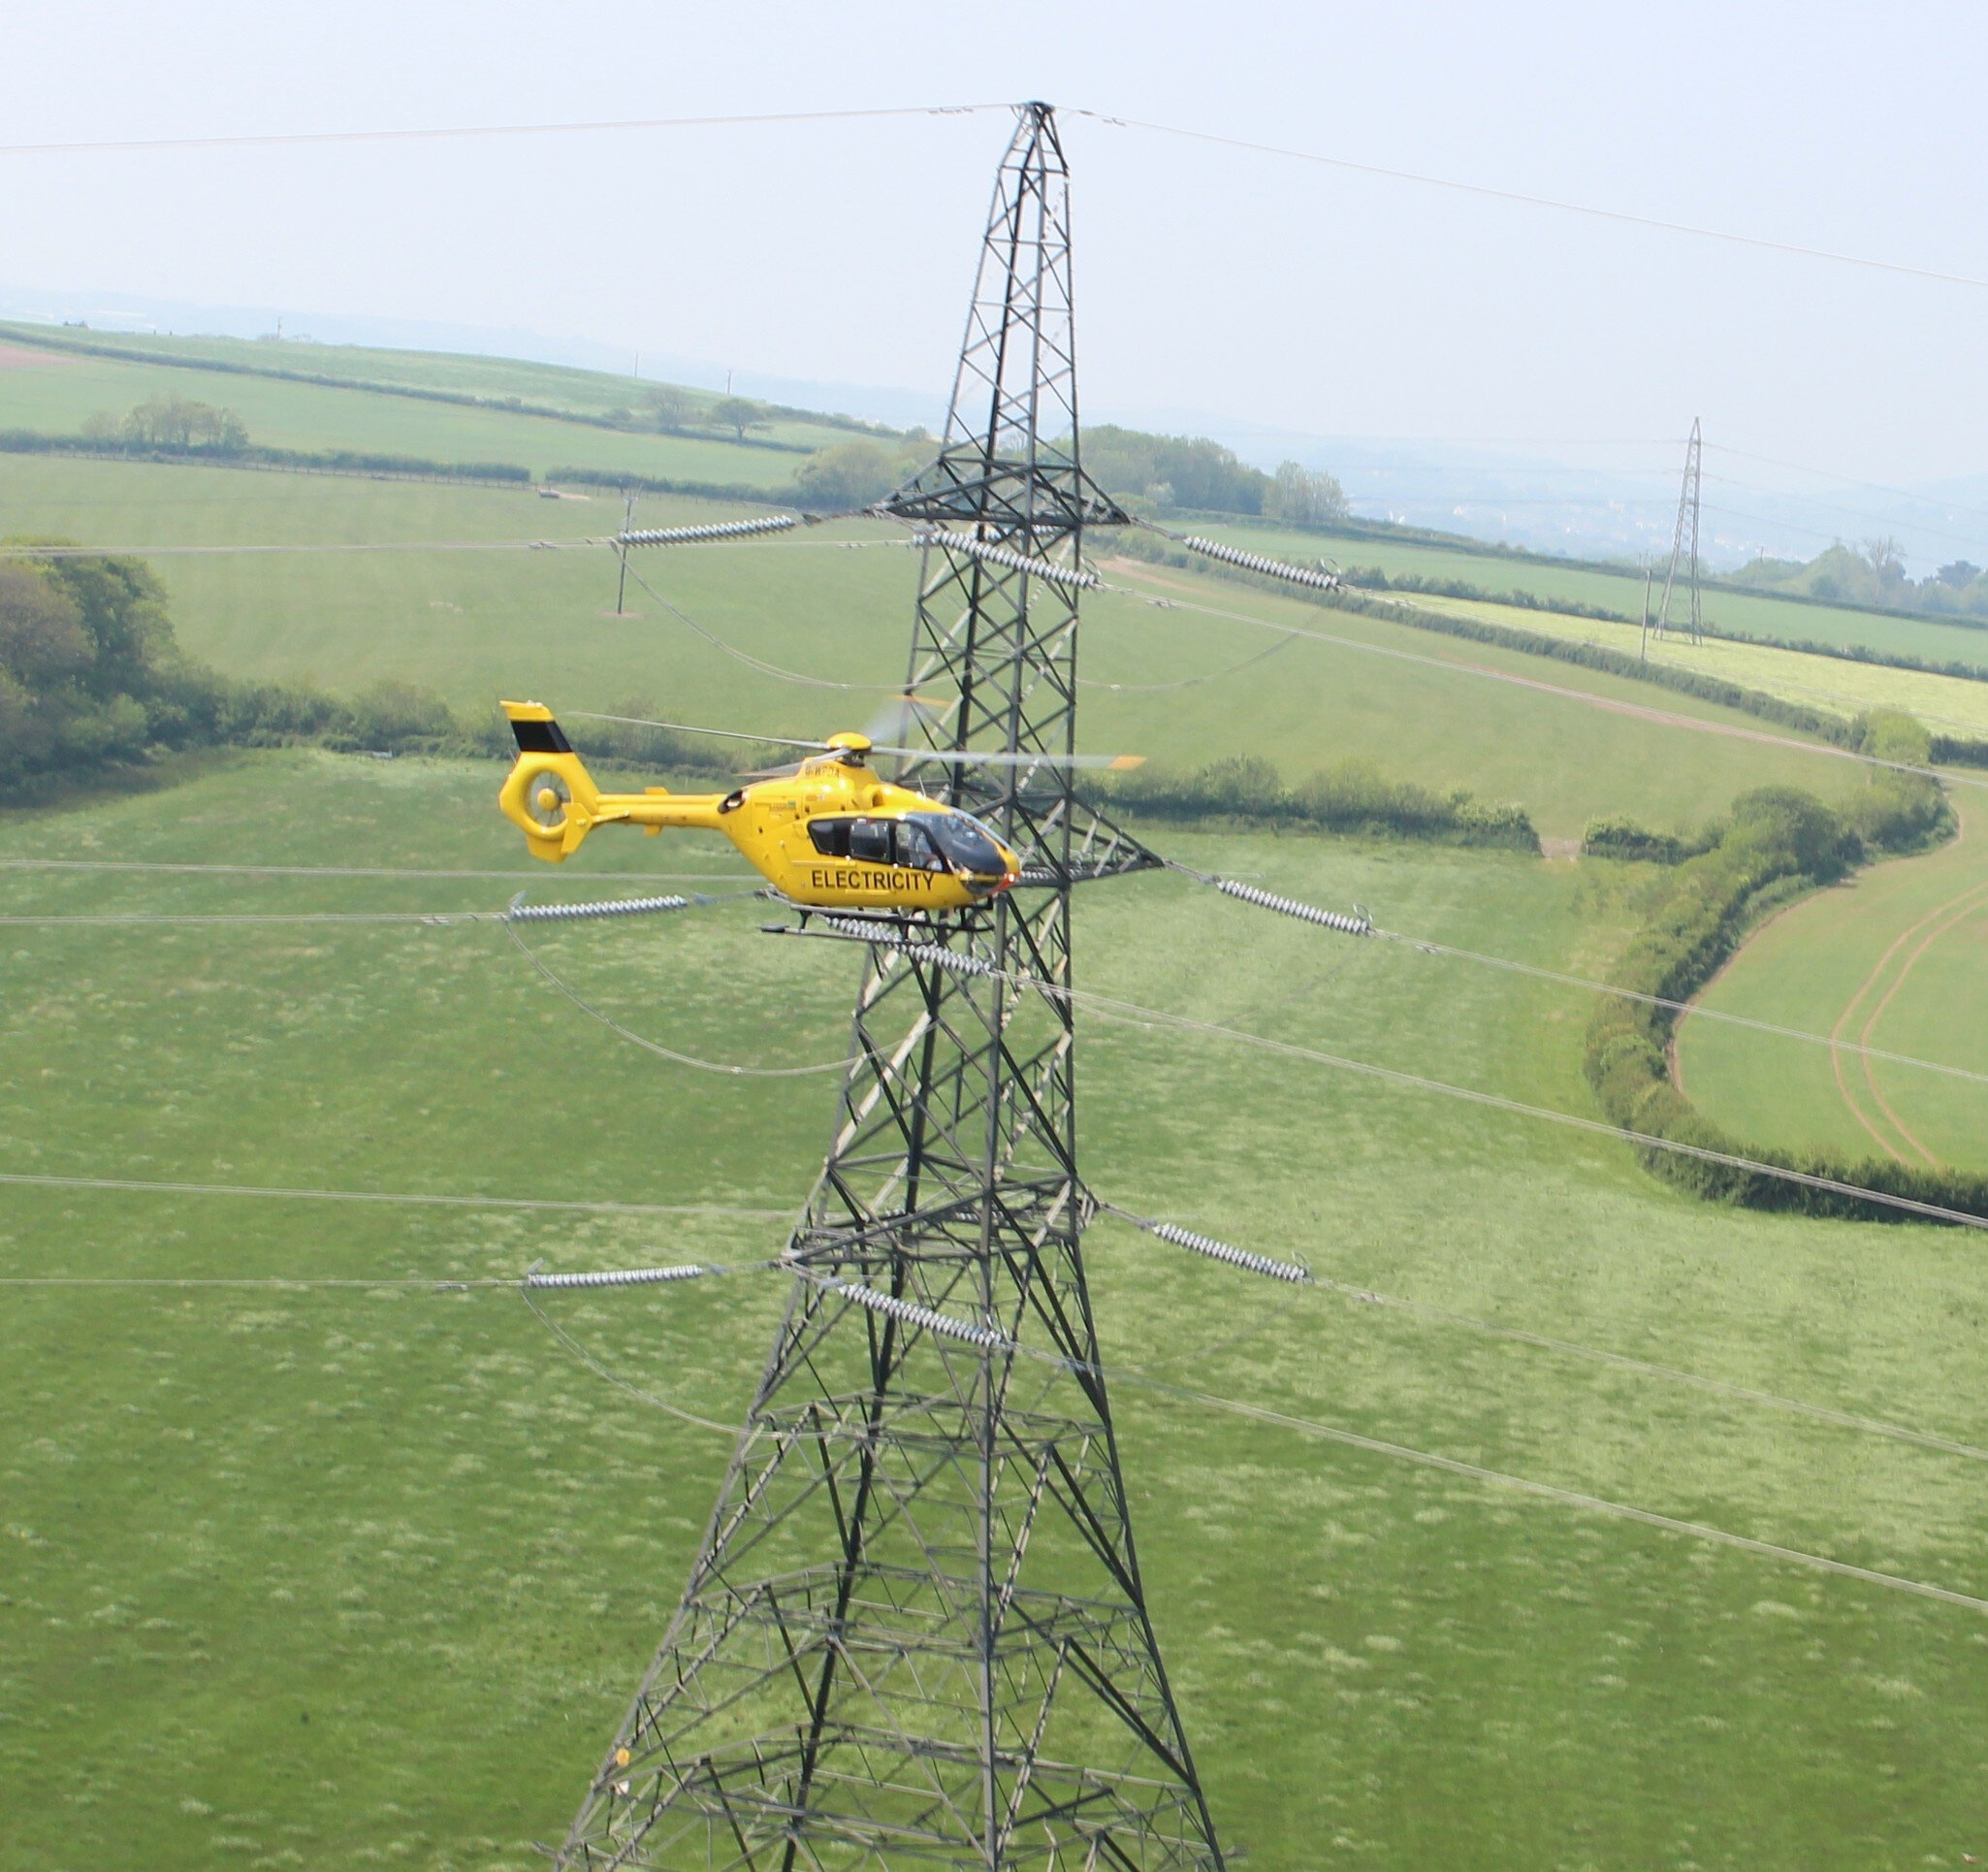 Power lines, helicopters, and data analytics